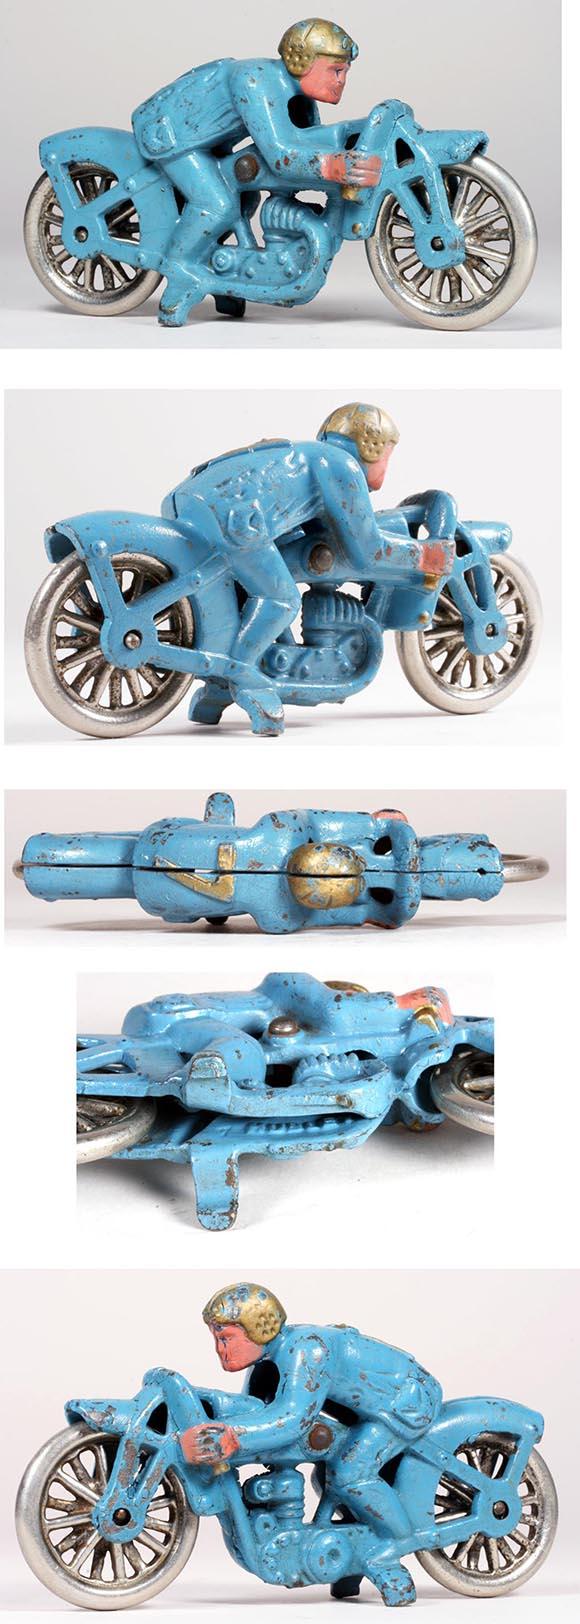 c.1933 Hubley, Cast Iron Hill Climber #7 Blue Motorcycle